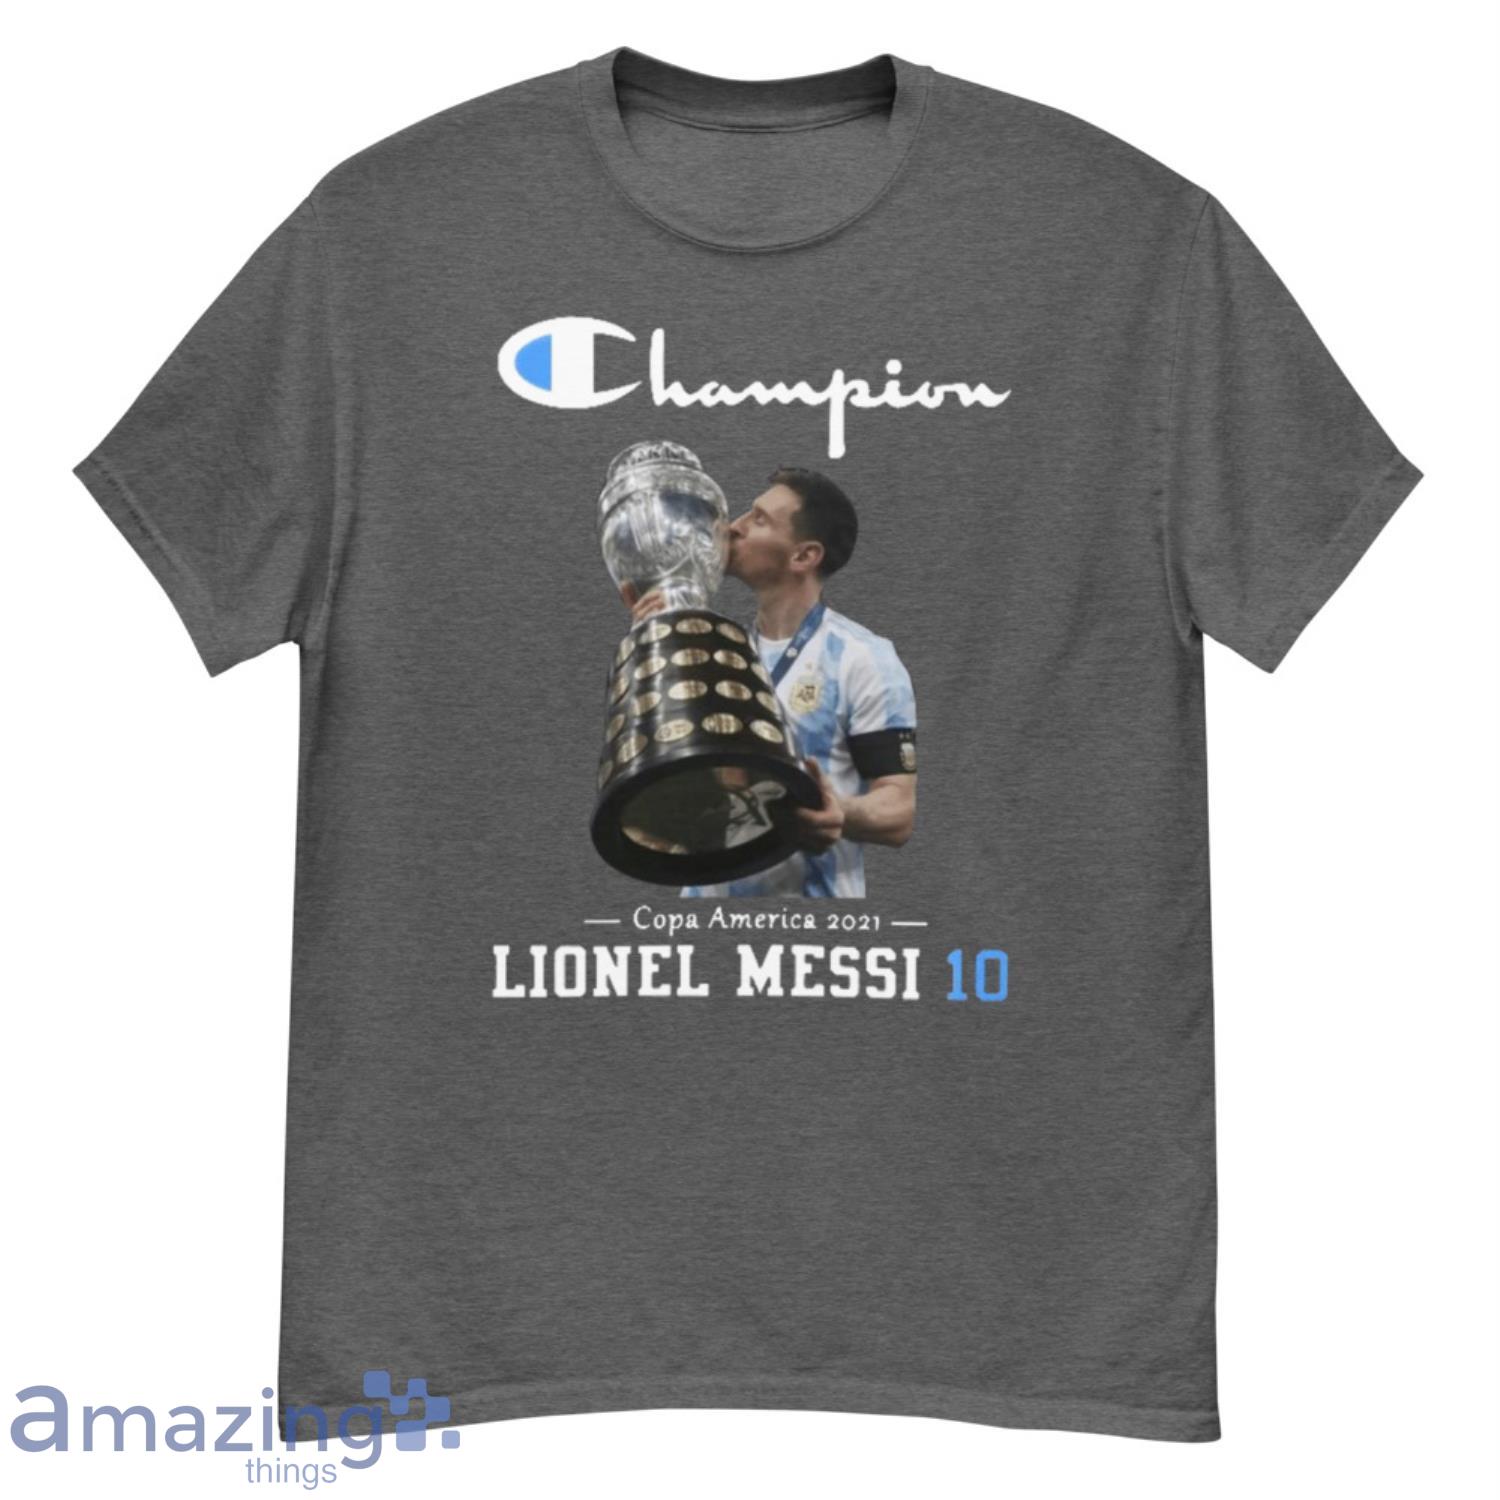 Argentina Lionel Messi 10 Champion COPA America T-Shirt Gift For Fans Product Photo 1